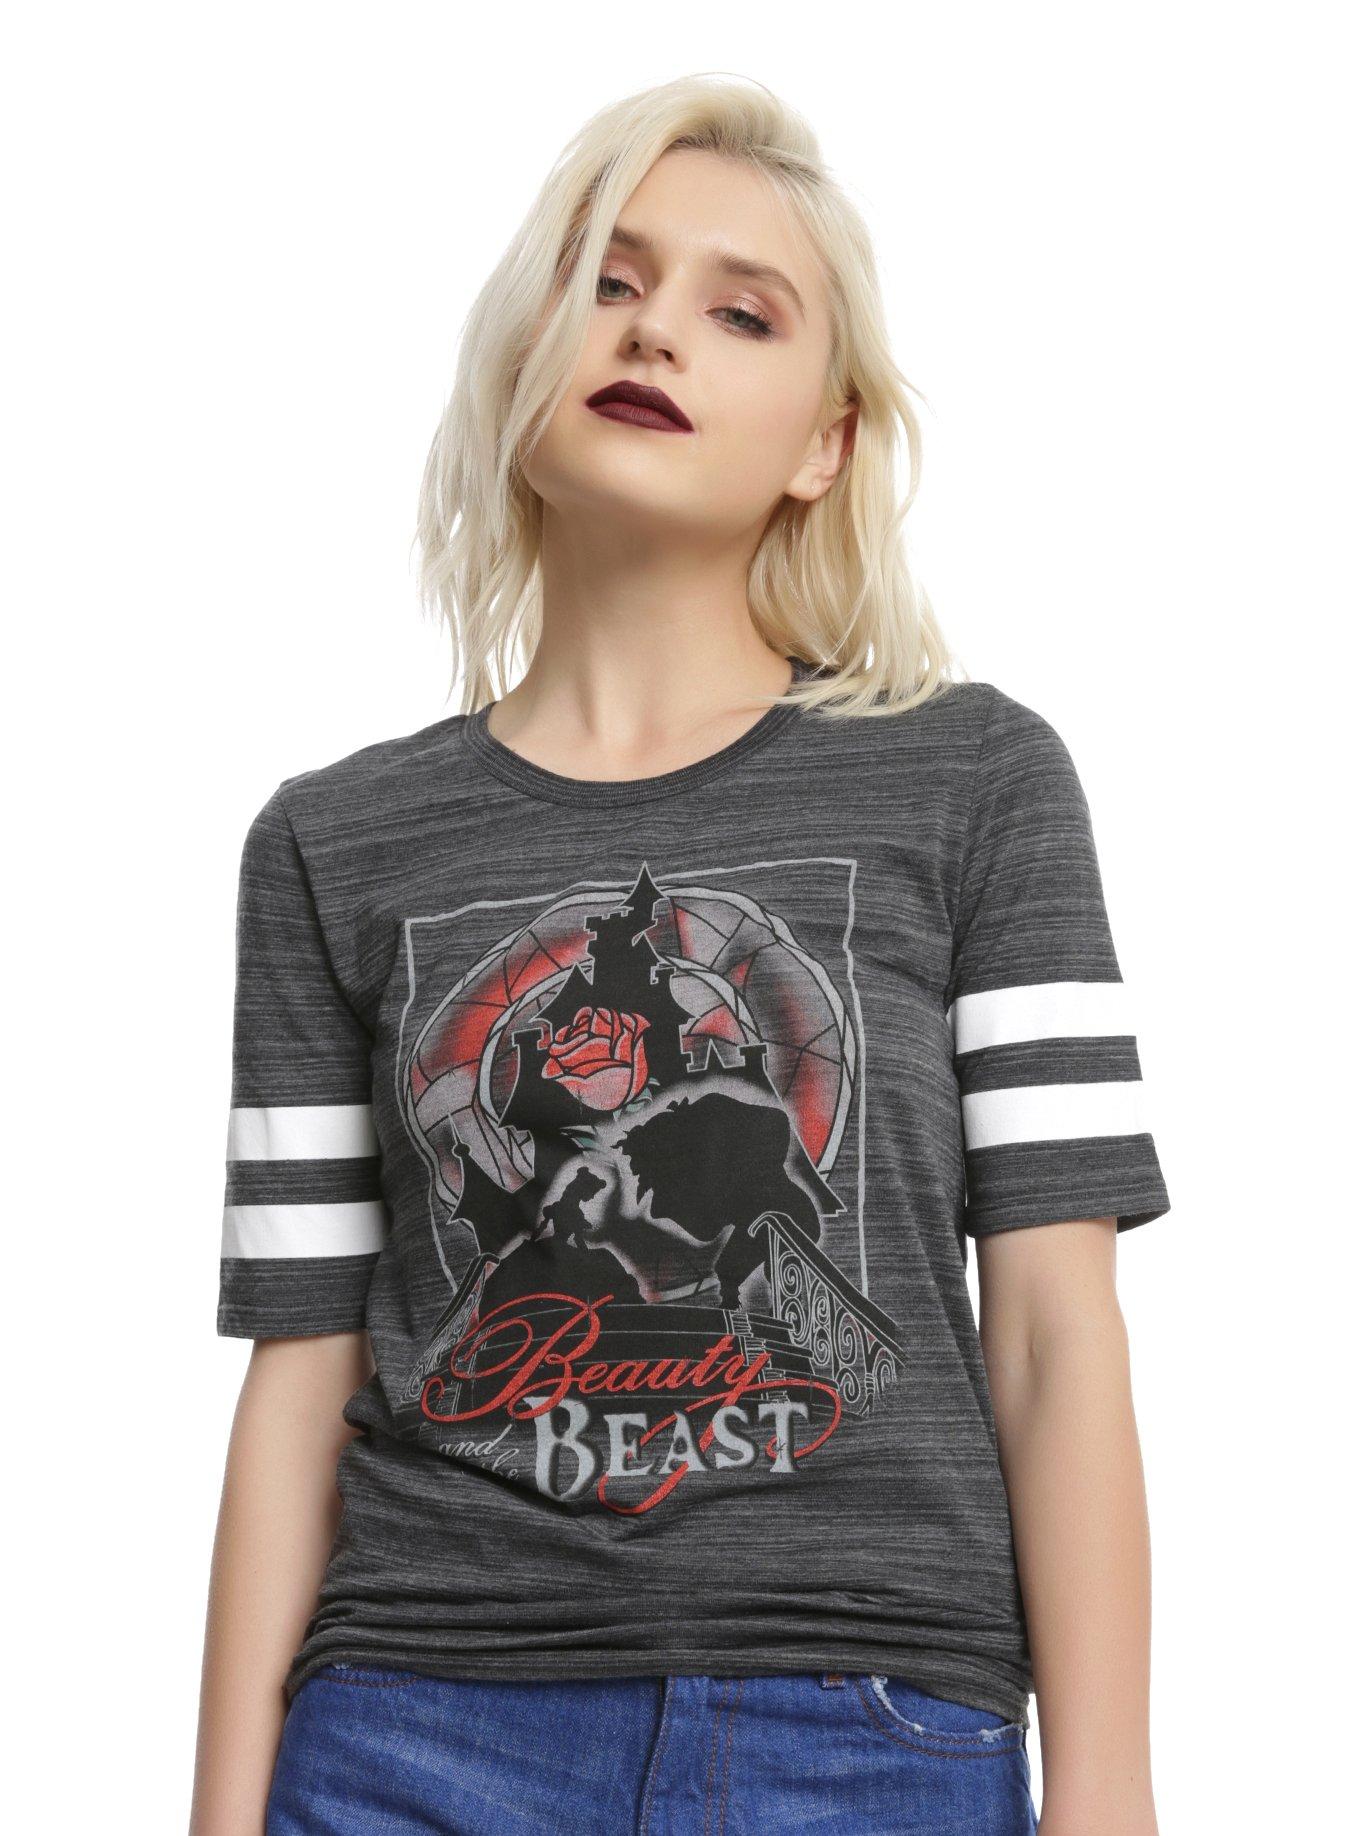 Disney Beauty And The Beast Movie Poster Girls T-Shirt, BLACK, hi-res